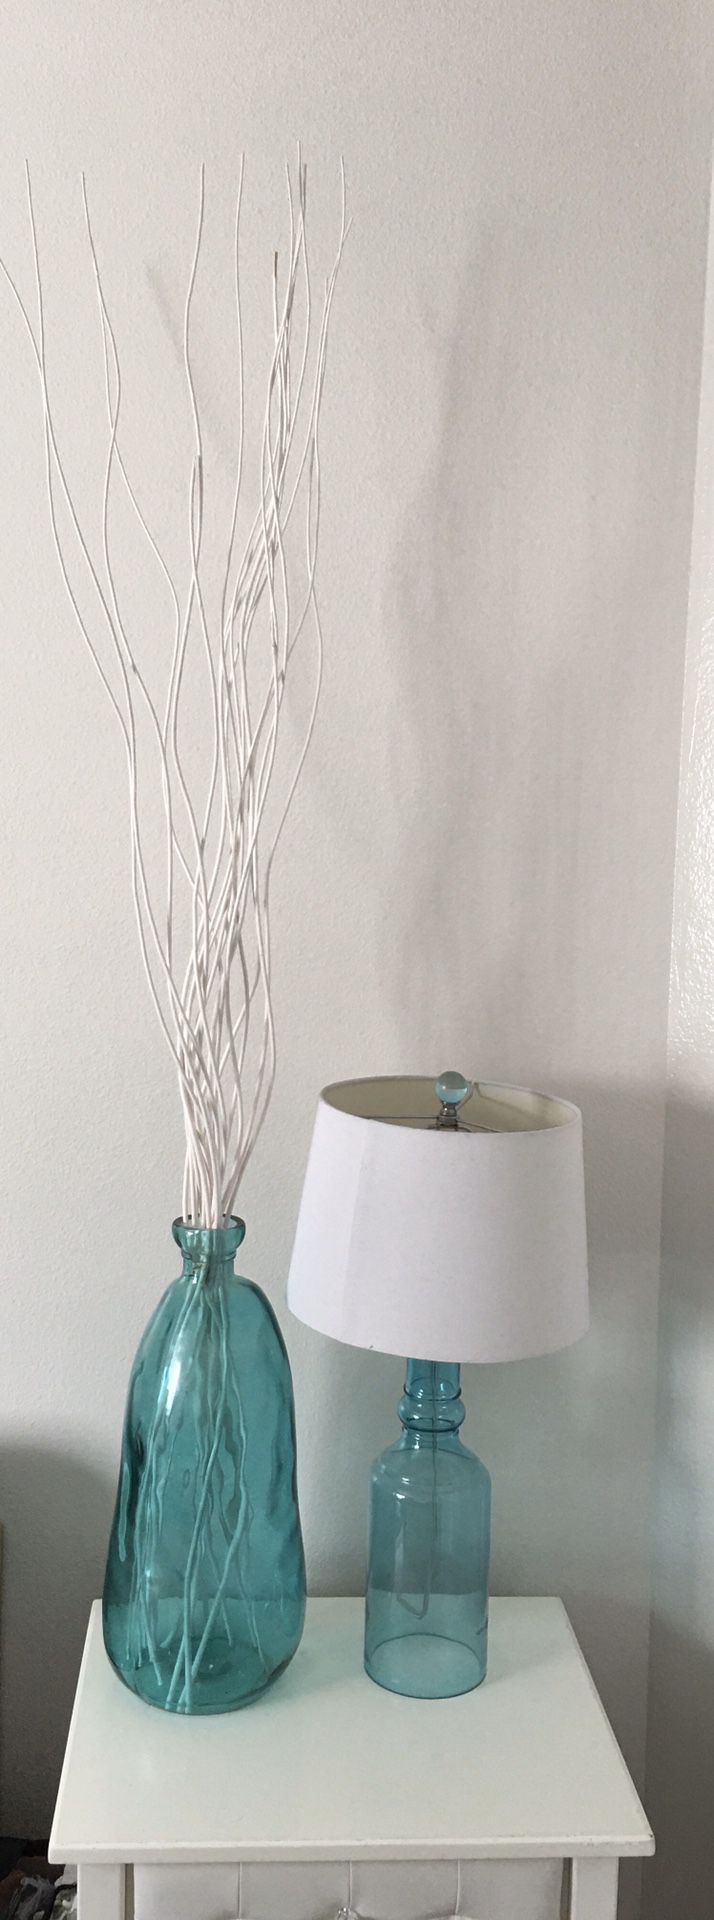 Teal / blue glass lamp and vase with branches